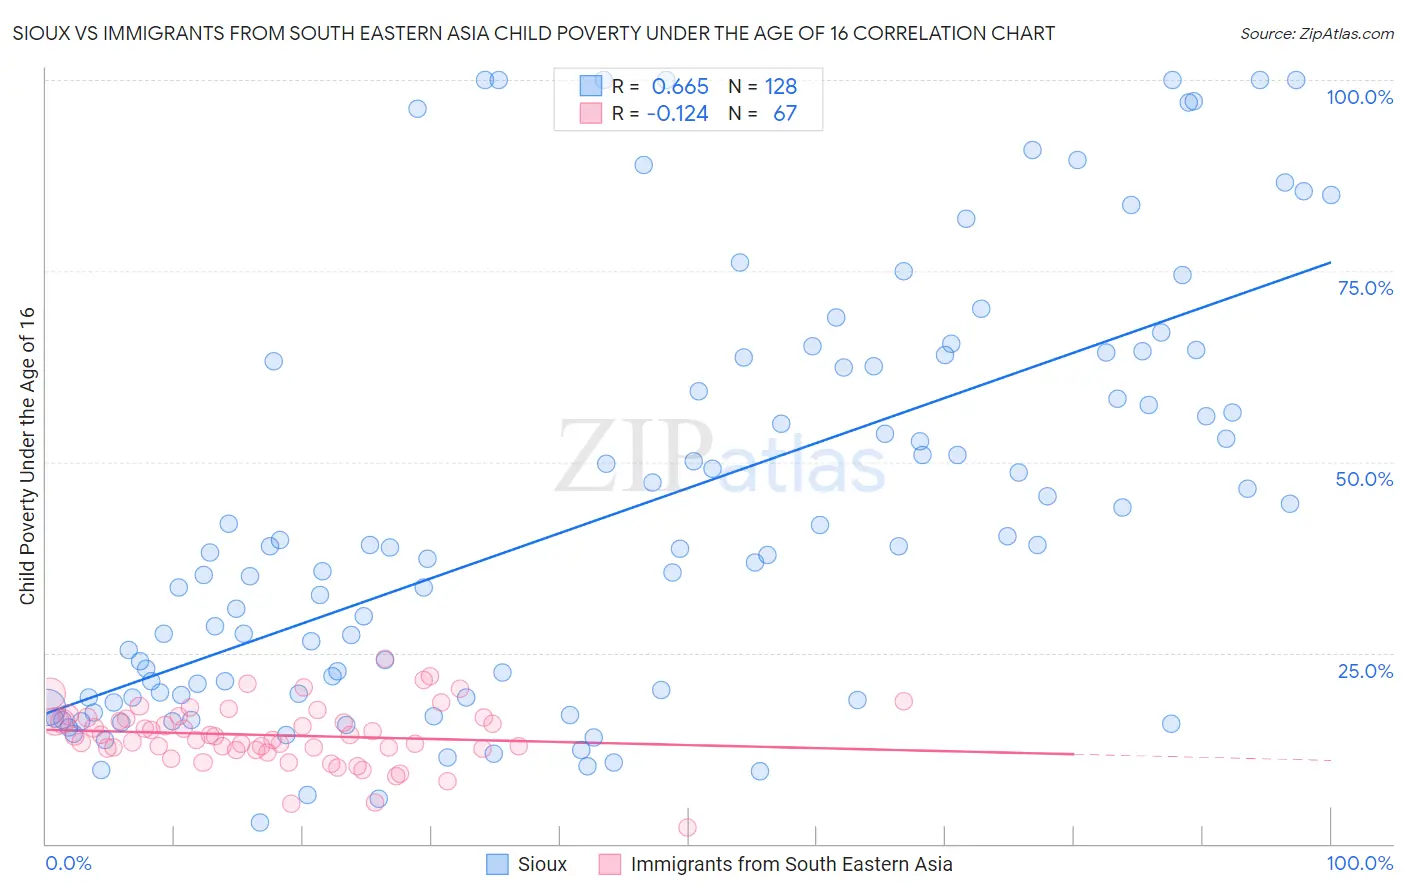 Sioux vs Immigrants from South Eastern Asia Child Poverty Under the Age of 16